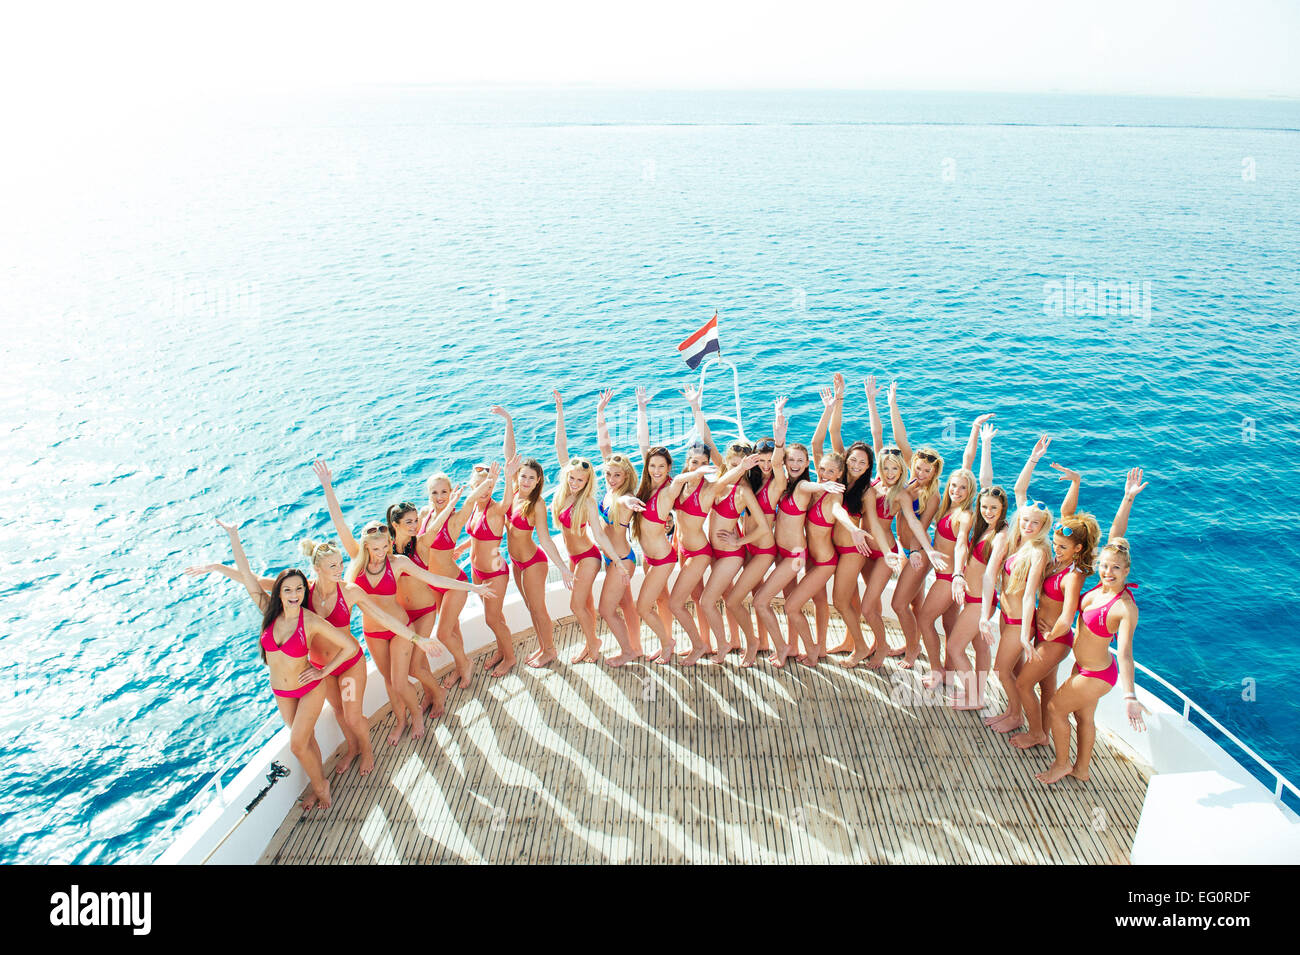 The 24 participants of the 'Miss Germany Camp 2015' pose at Soma Bay (Egypt) on a boat, on February 12, 2015 in Soma Bay (Egypt). The 'Miss Germany' election 2015 will take place in the Europa Park Rust on 28.02.2015. Photo: picture alliance/Robert Schle Stock Photo